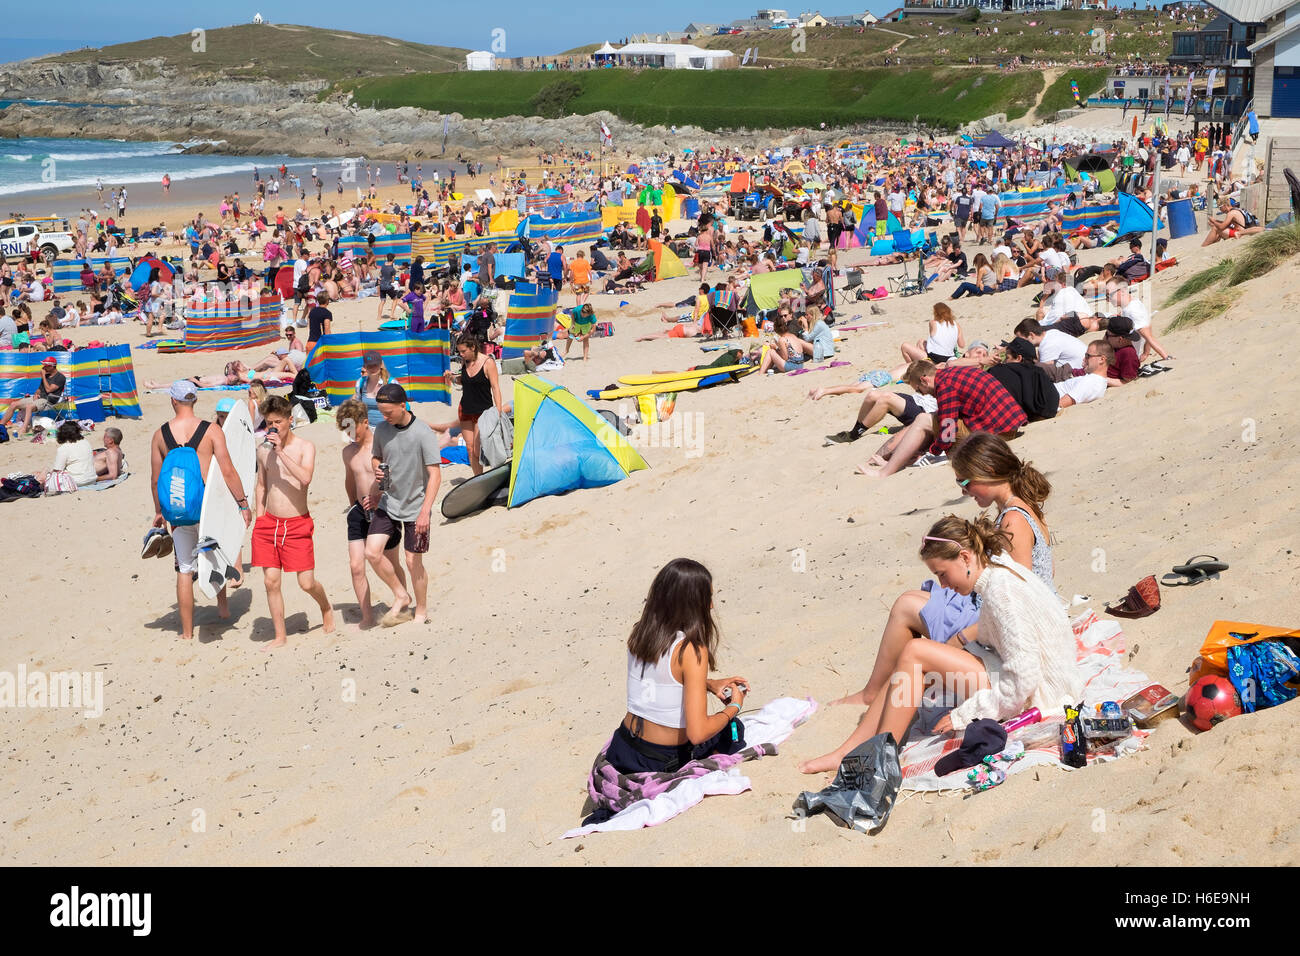 A typical summer day at Fistral beach in Newquay, Cornwall, England, UK Stock Photo